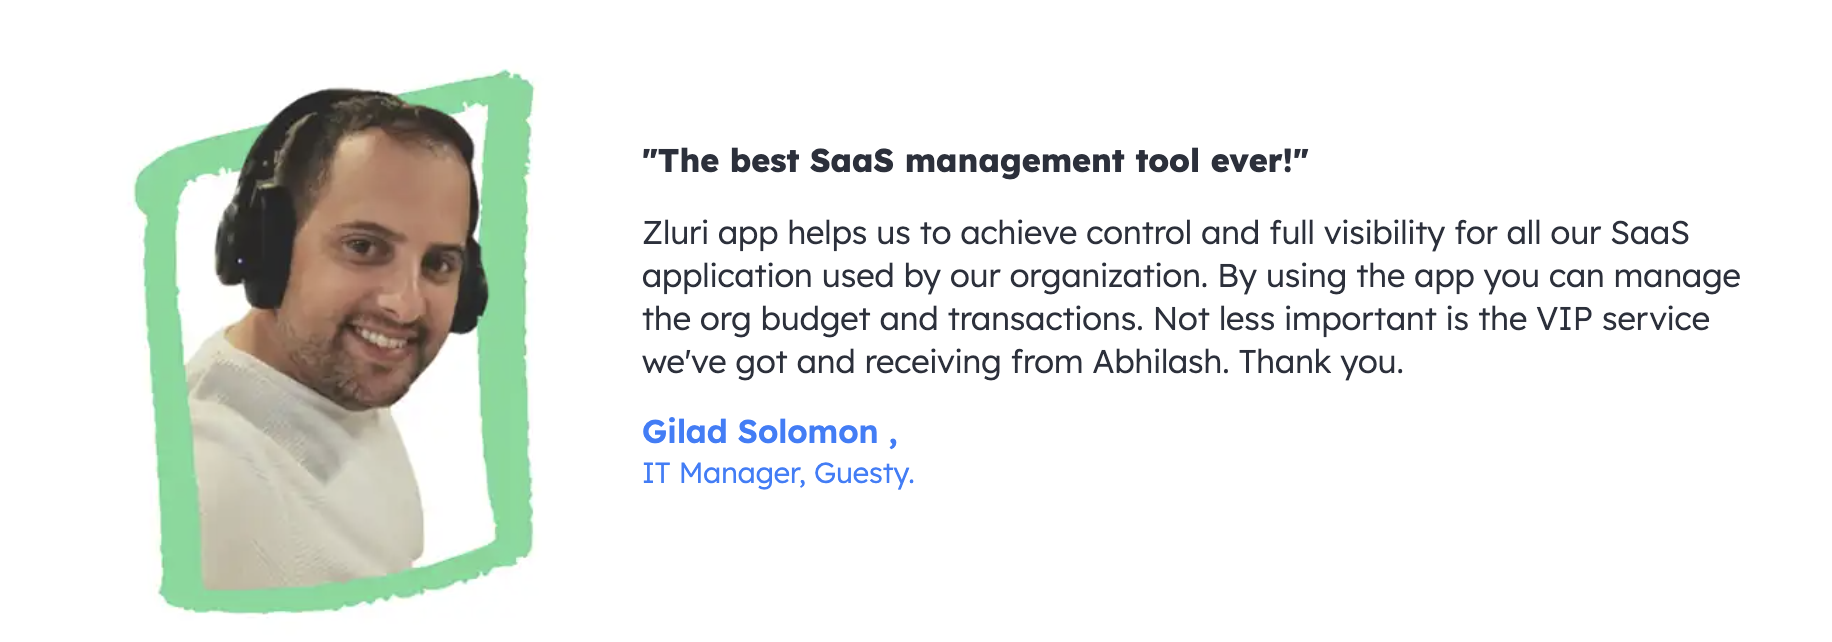 Zluri gives full visibility into SaaS environment